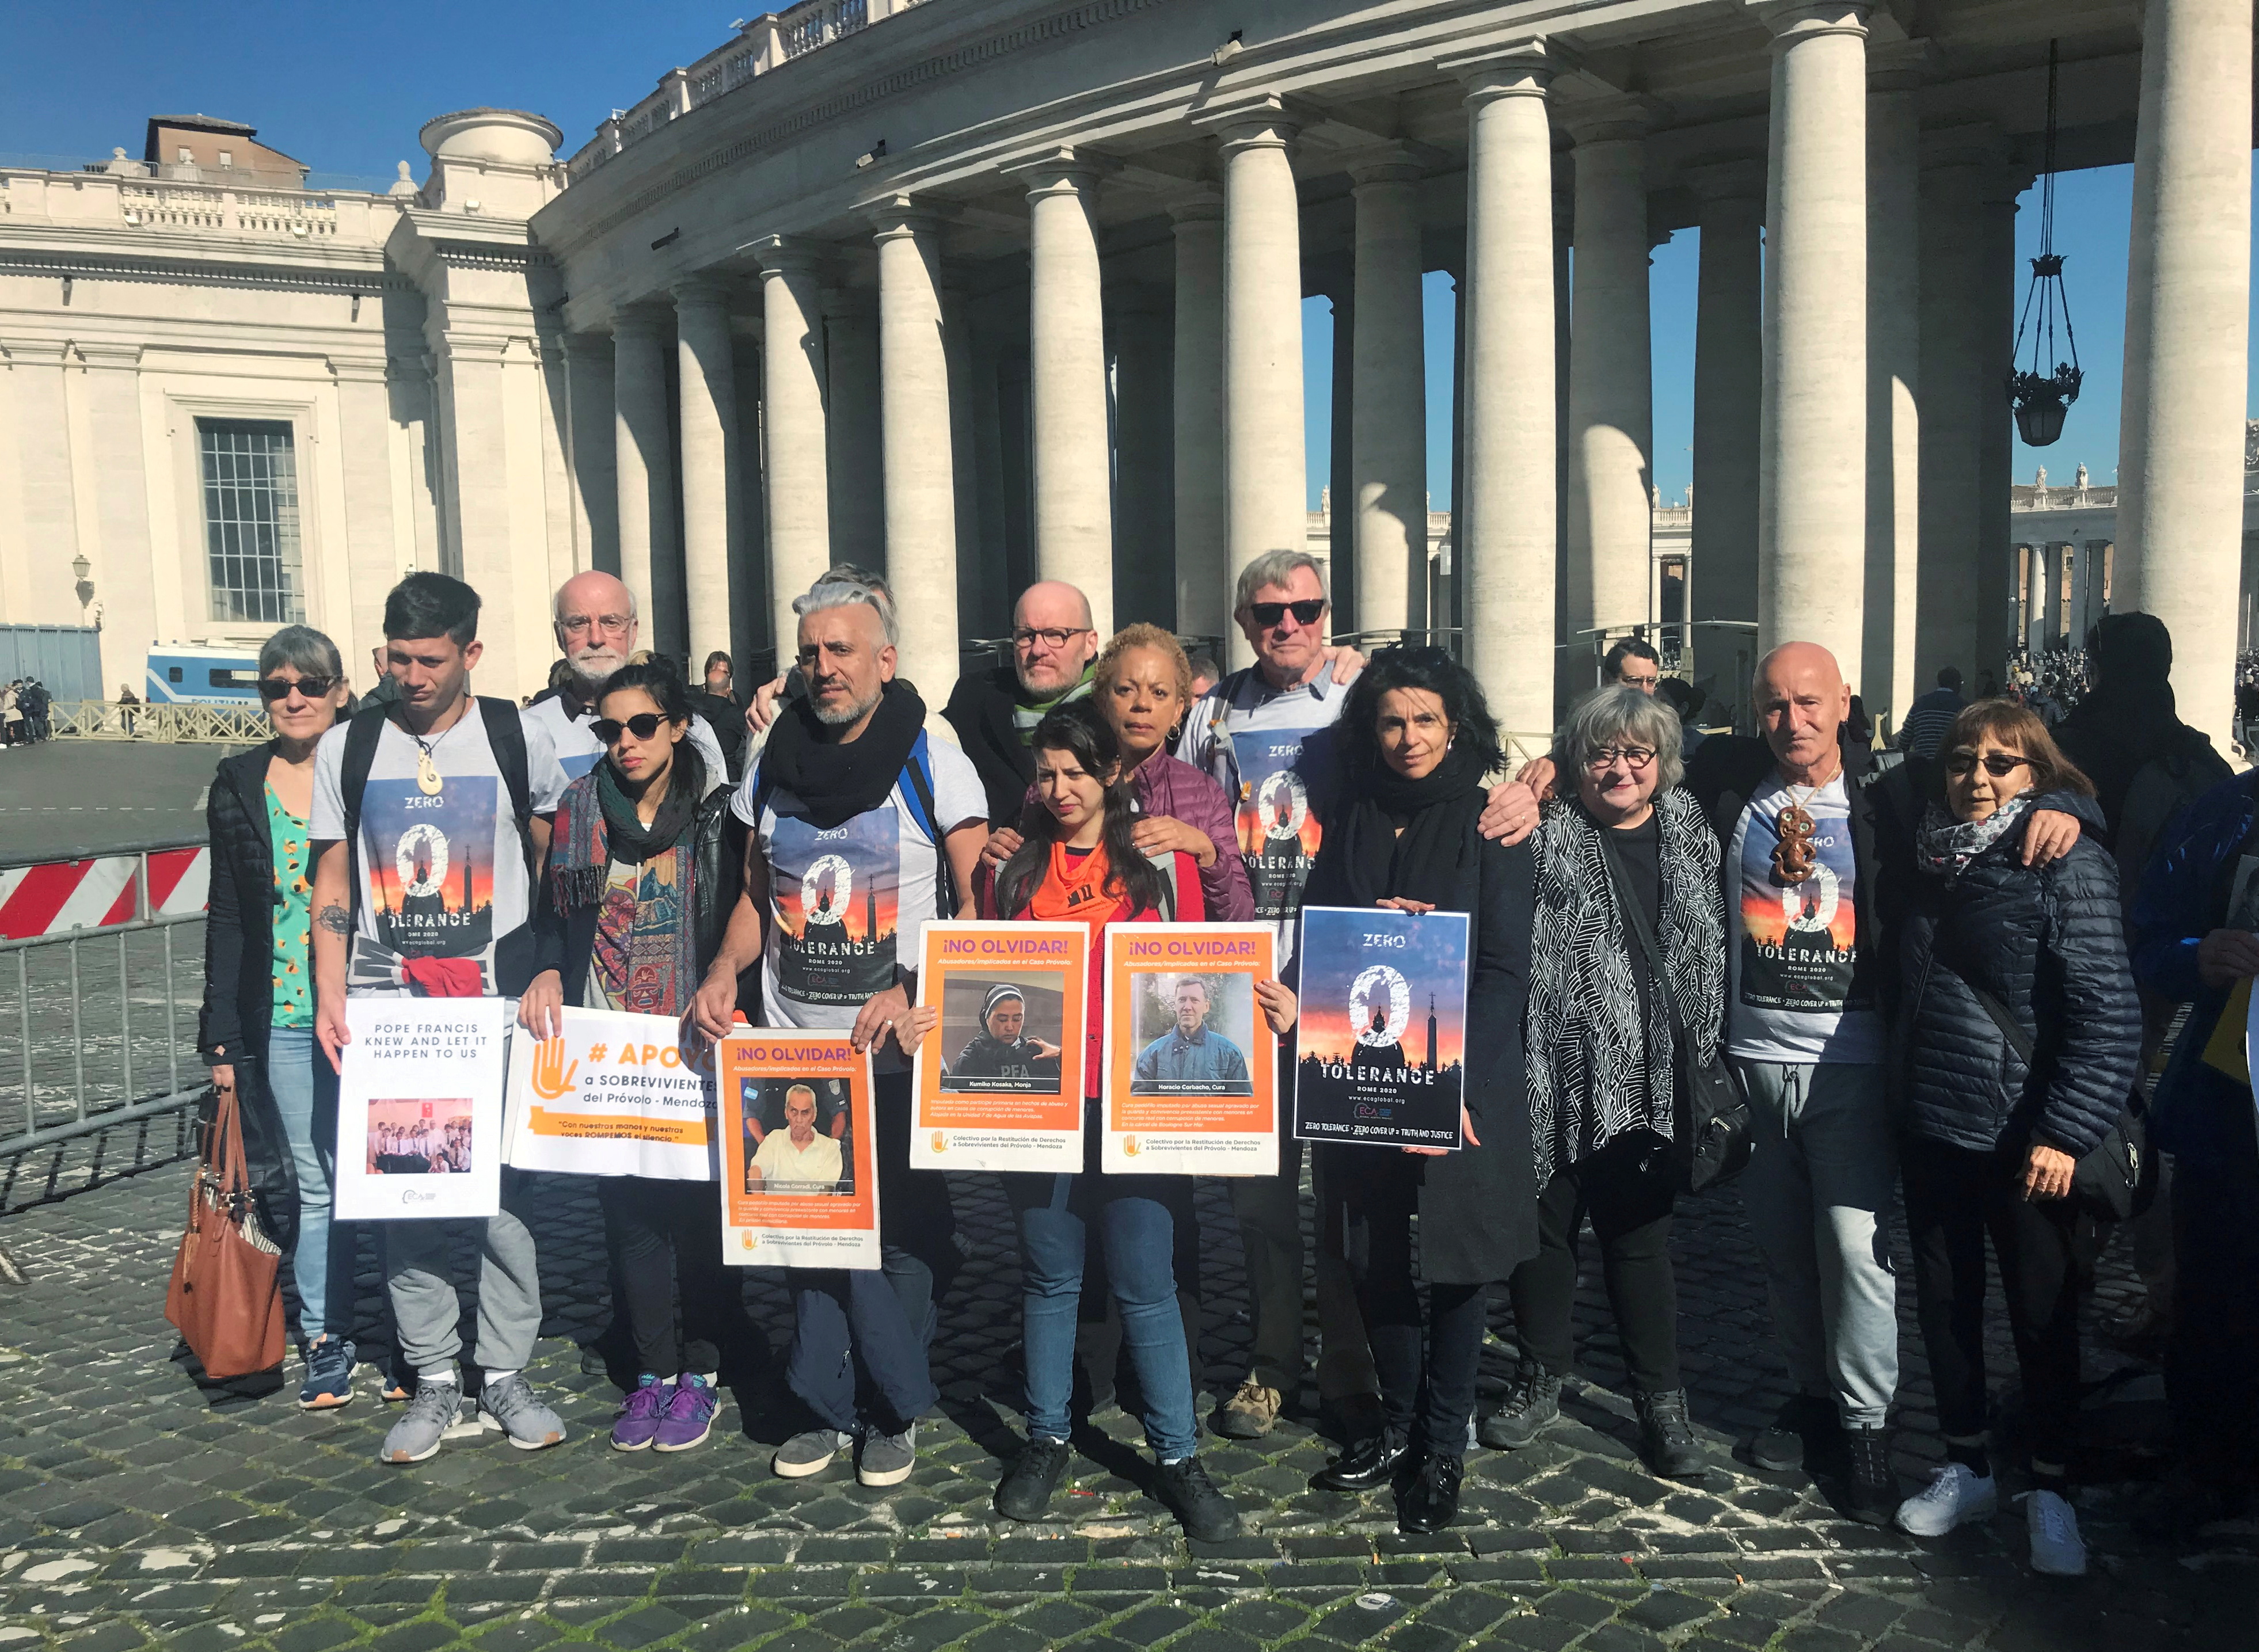 Victims of abuse by Roman Catholic priests pose with demands at the Vatican